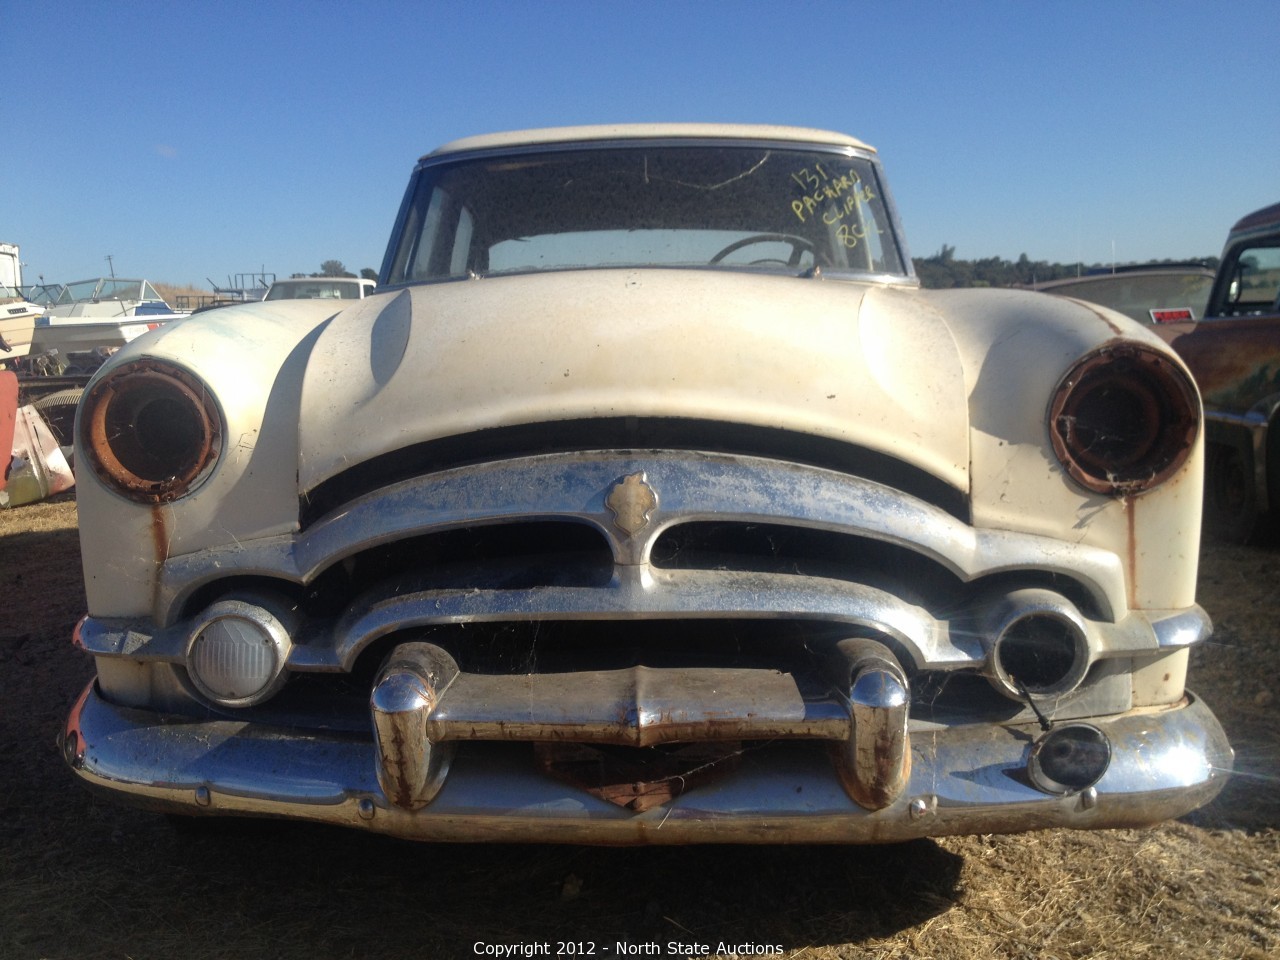 Antique Car, Barn Finds, South-forty Treasures and Automotive Hoarding Auction, Oh! and a Couple of Vintage Boats